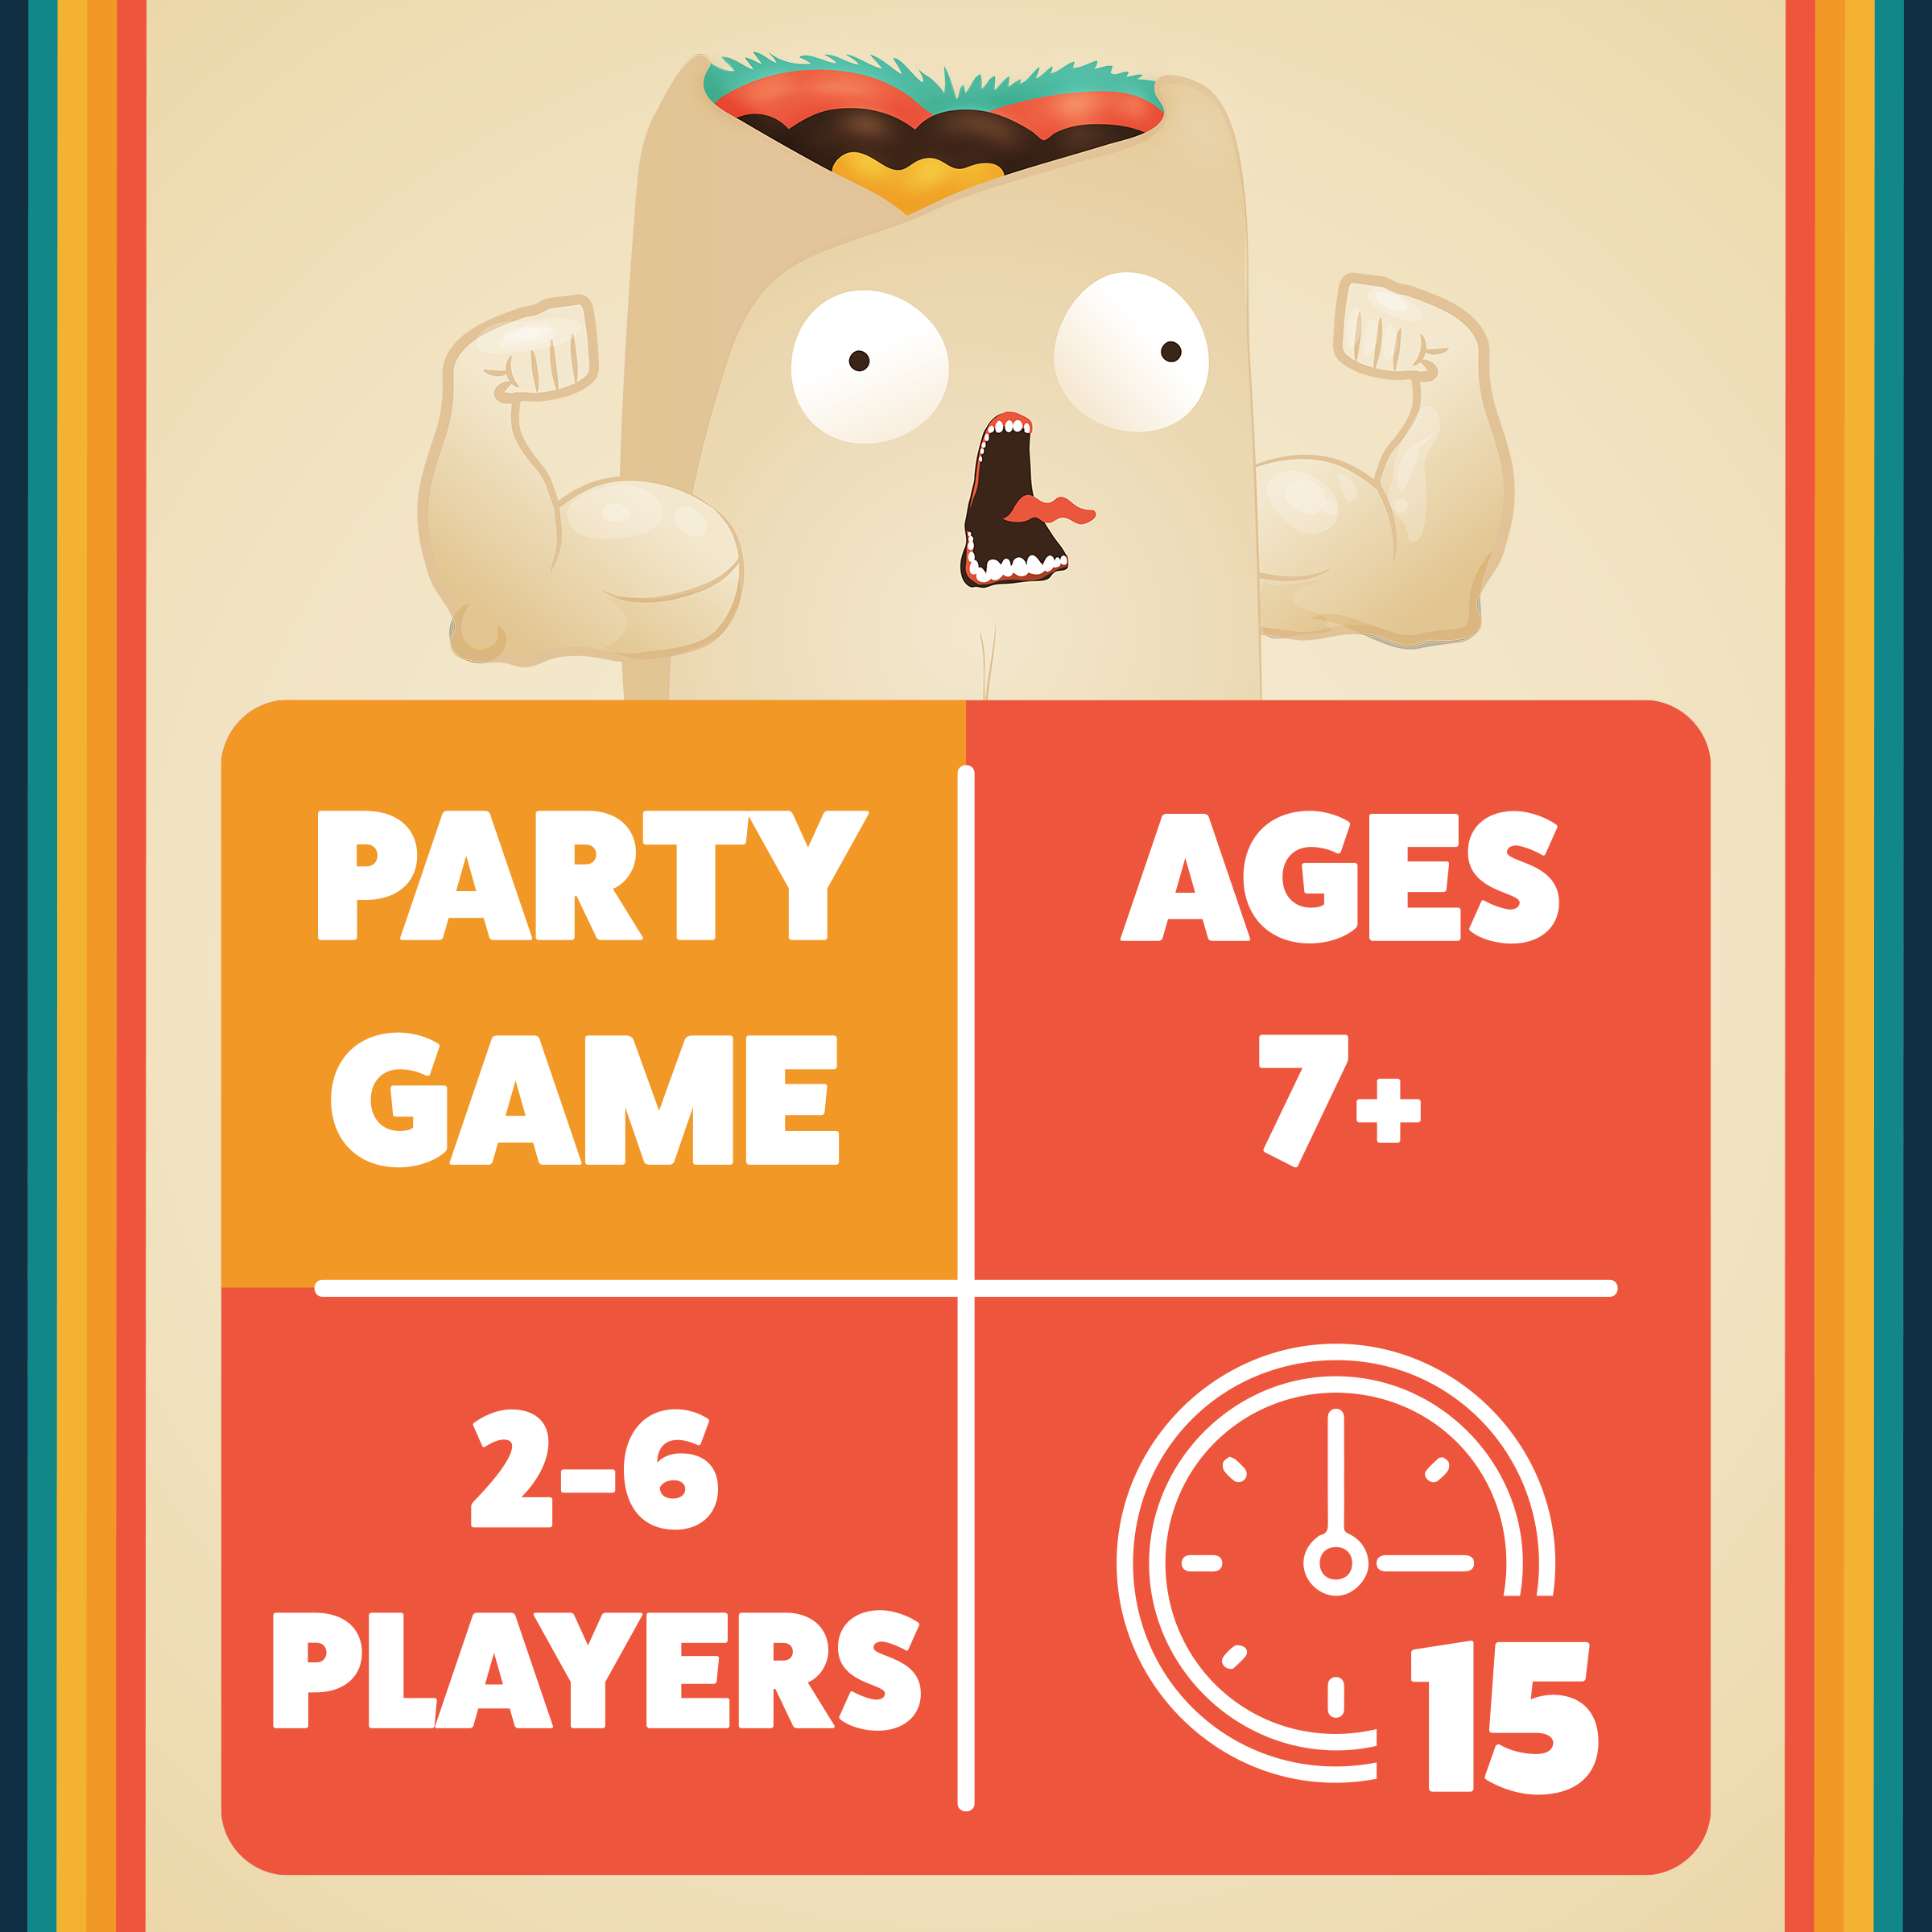 Throw Throw Burrito by Exploding Kittens - A Dodgeball Card Game - Family-Friendly Party Games - for Adults, Teens & Kids - 2-6 Players - image 3 of 6